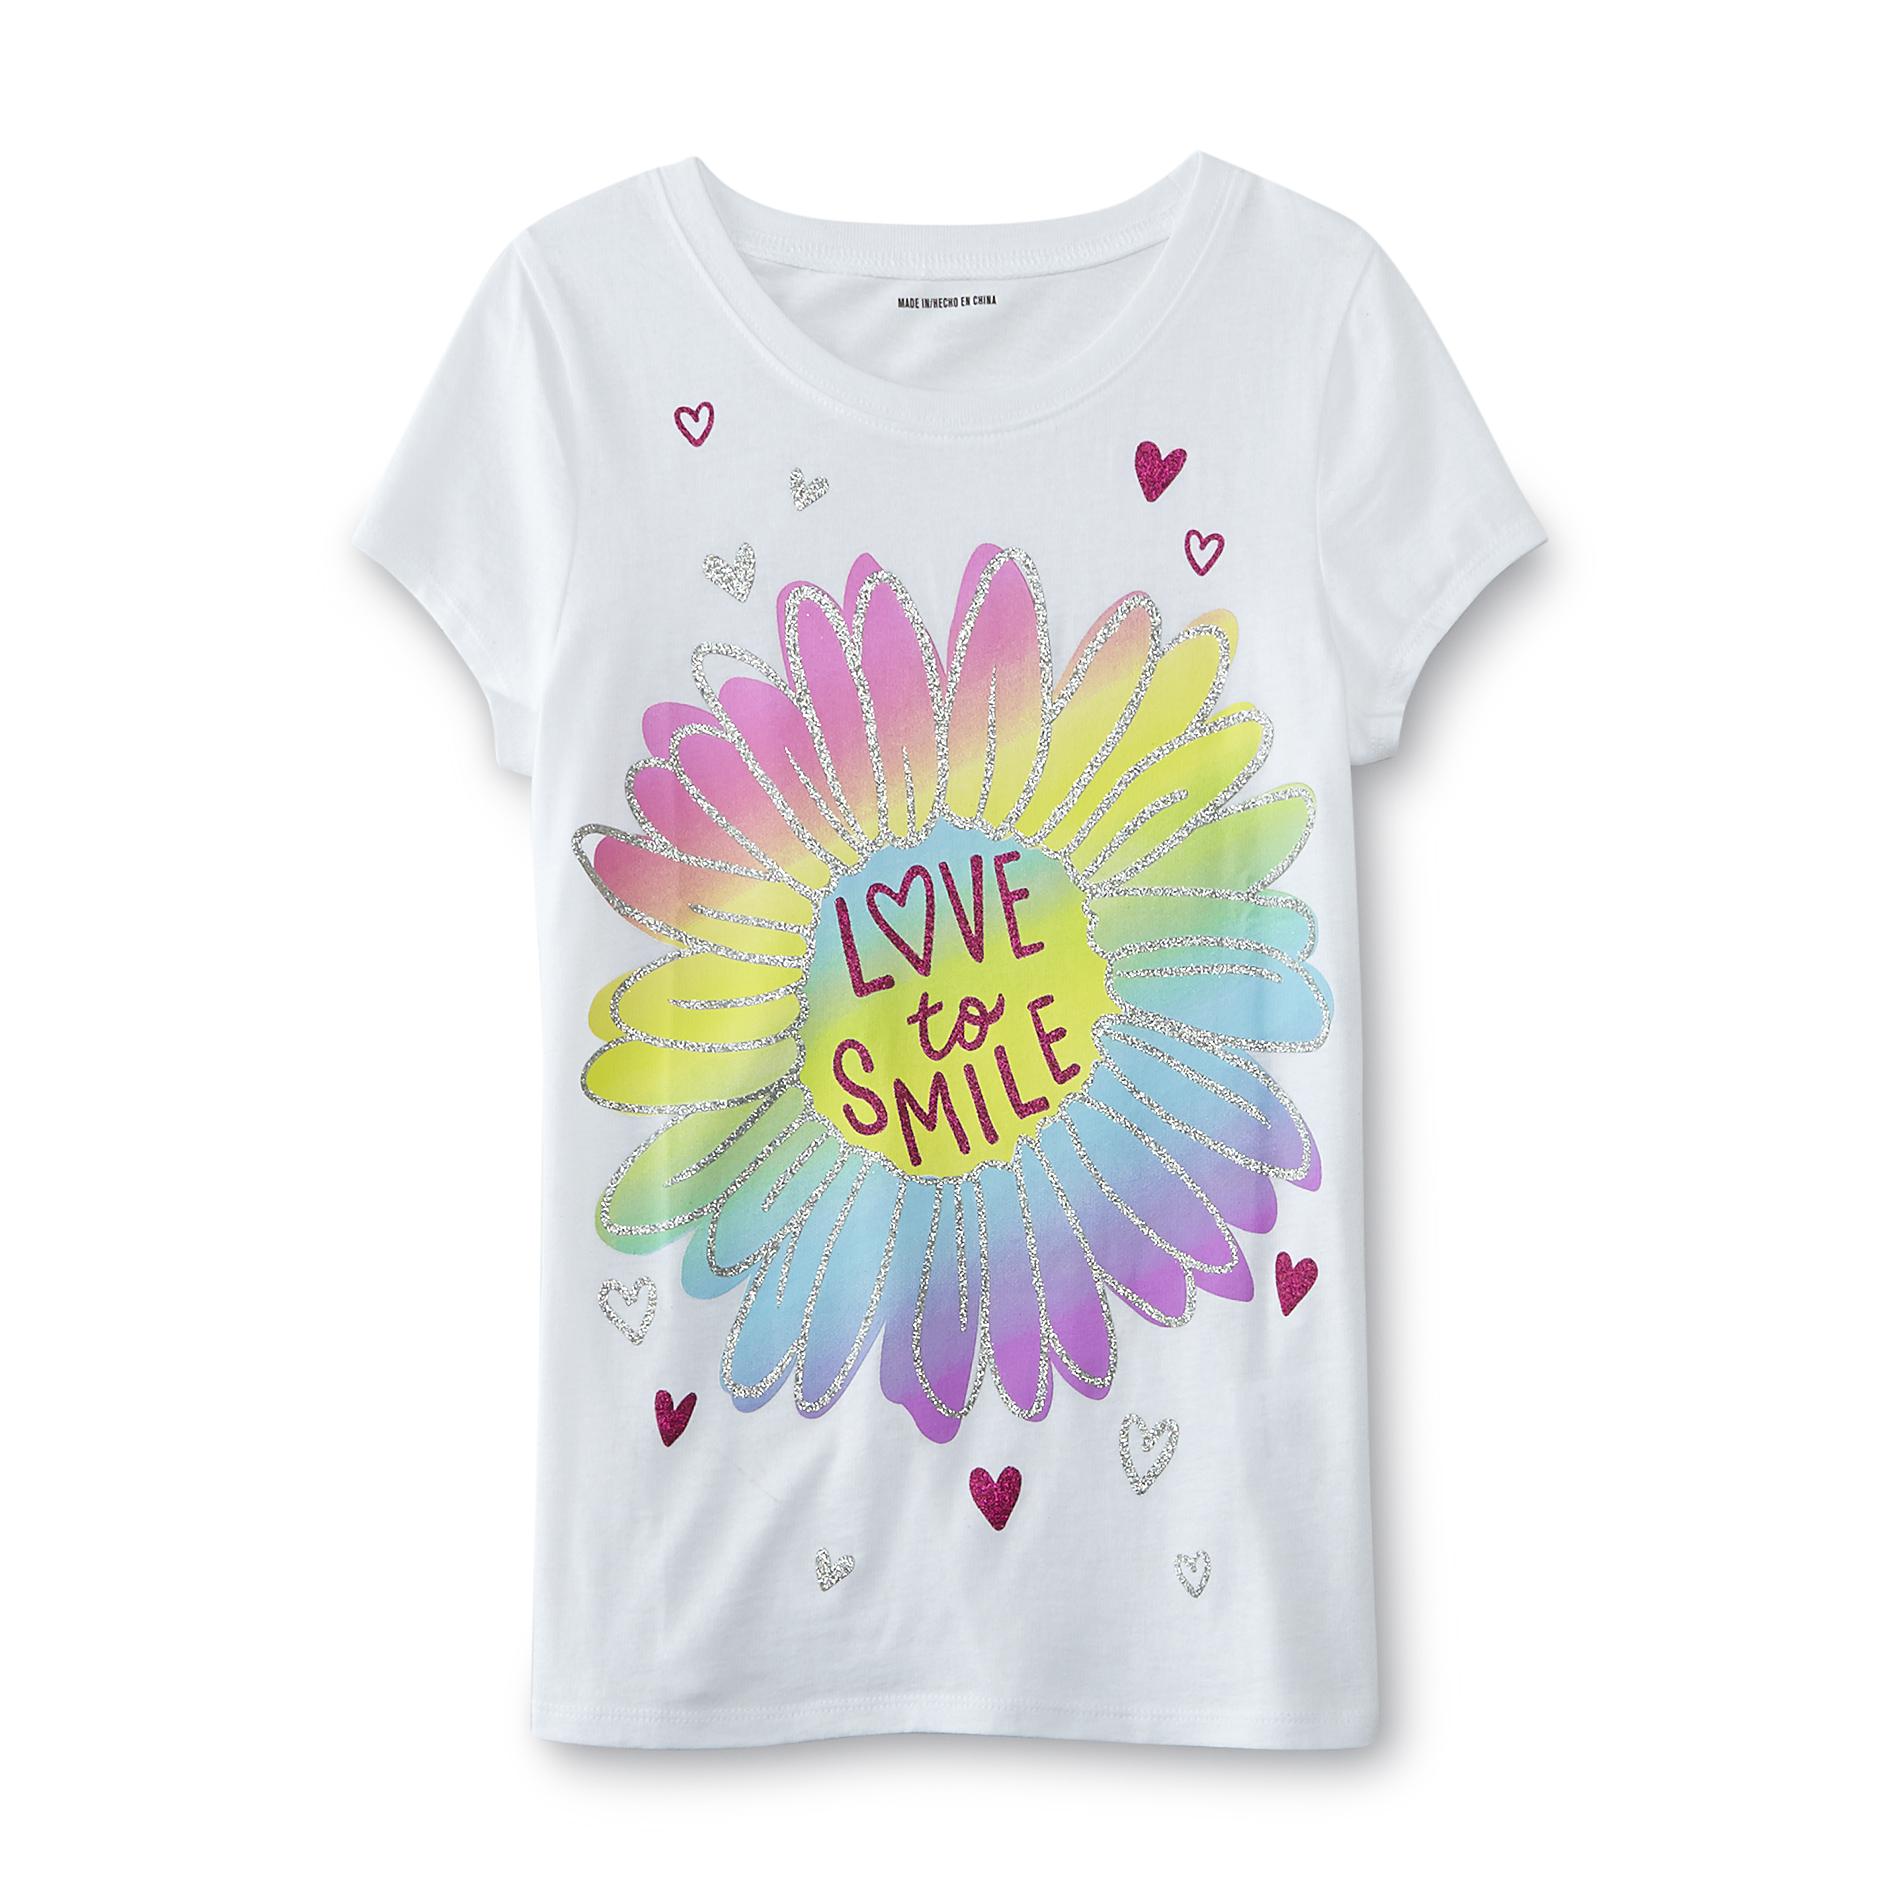 Girl's Graphic T-Shirt - Love to Smile